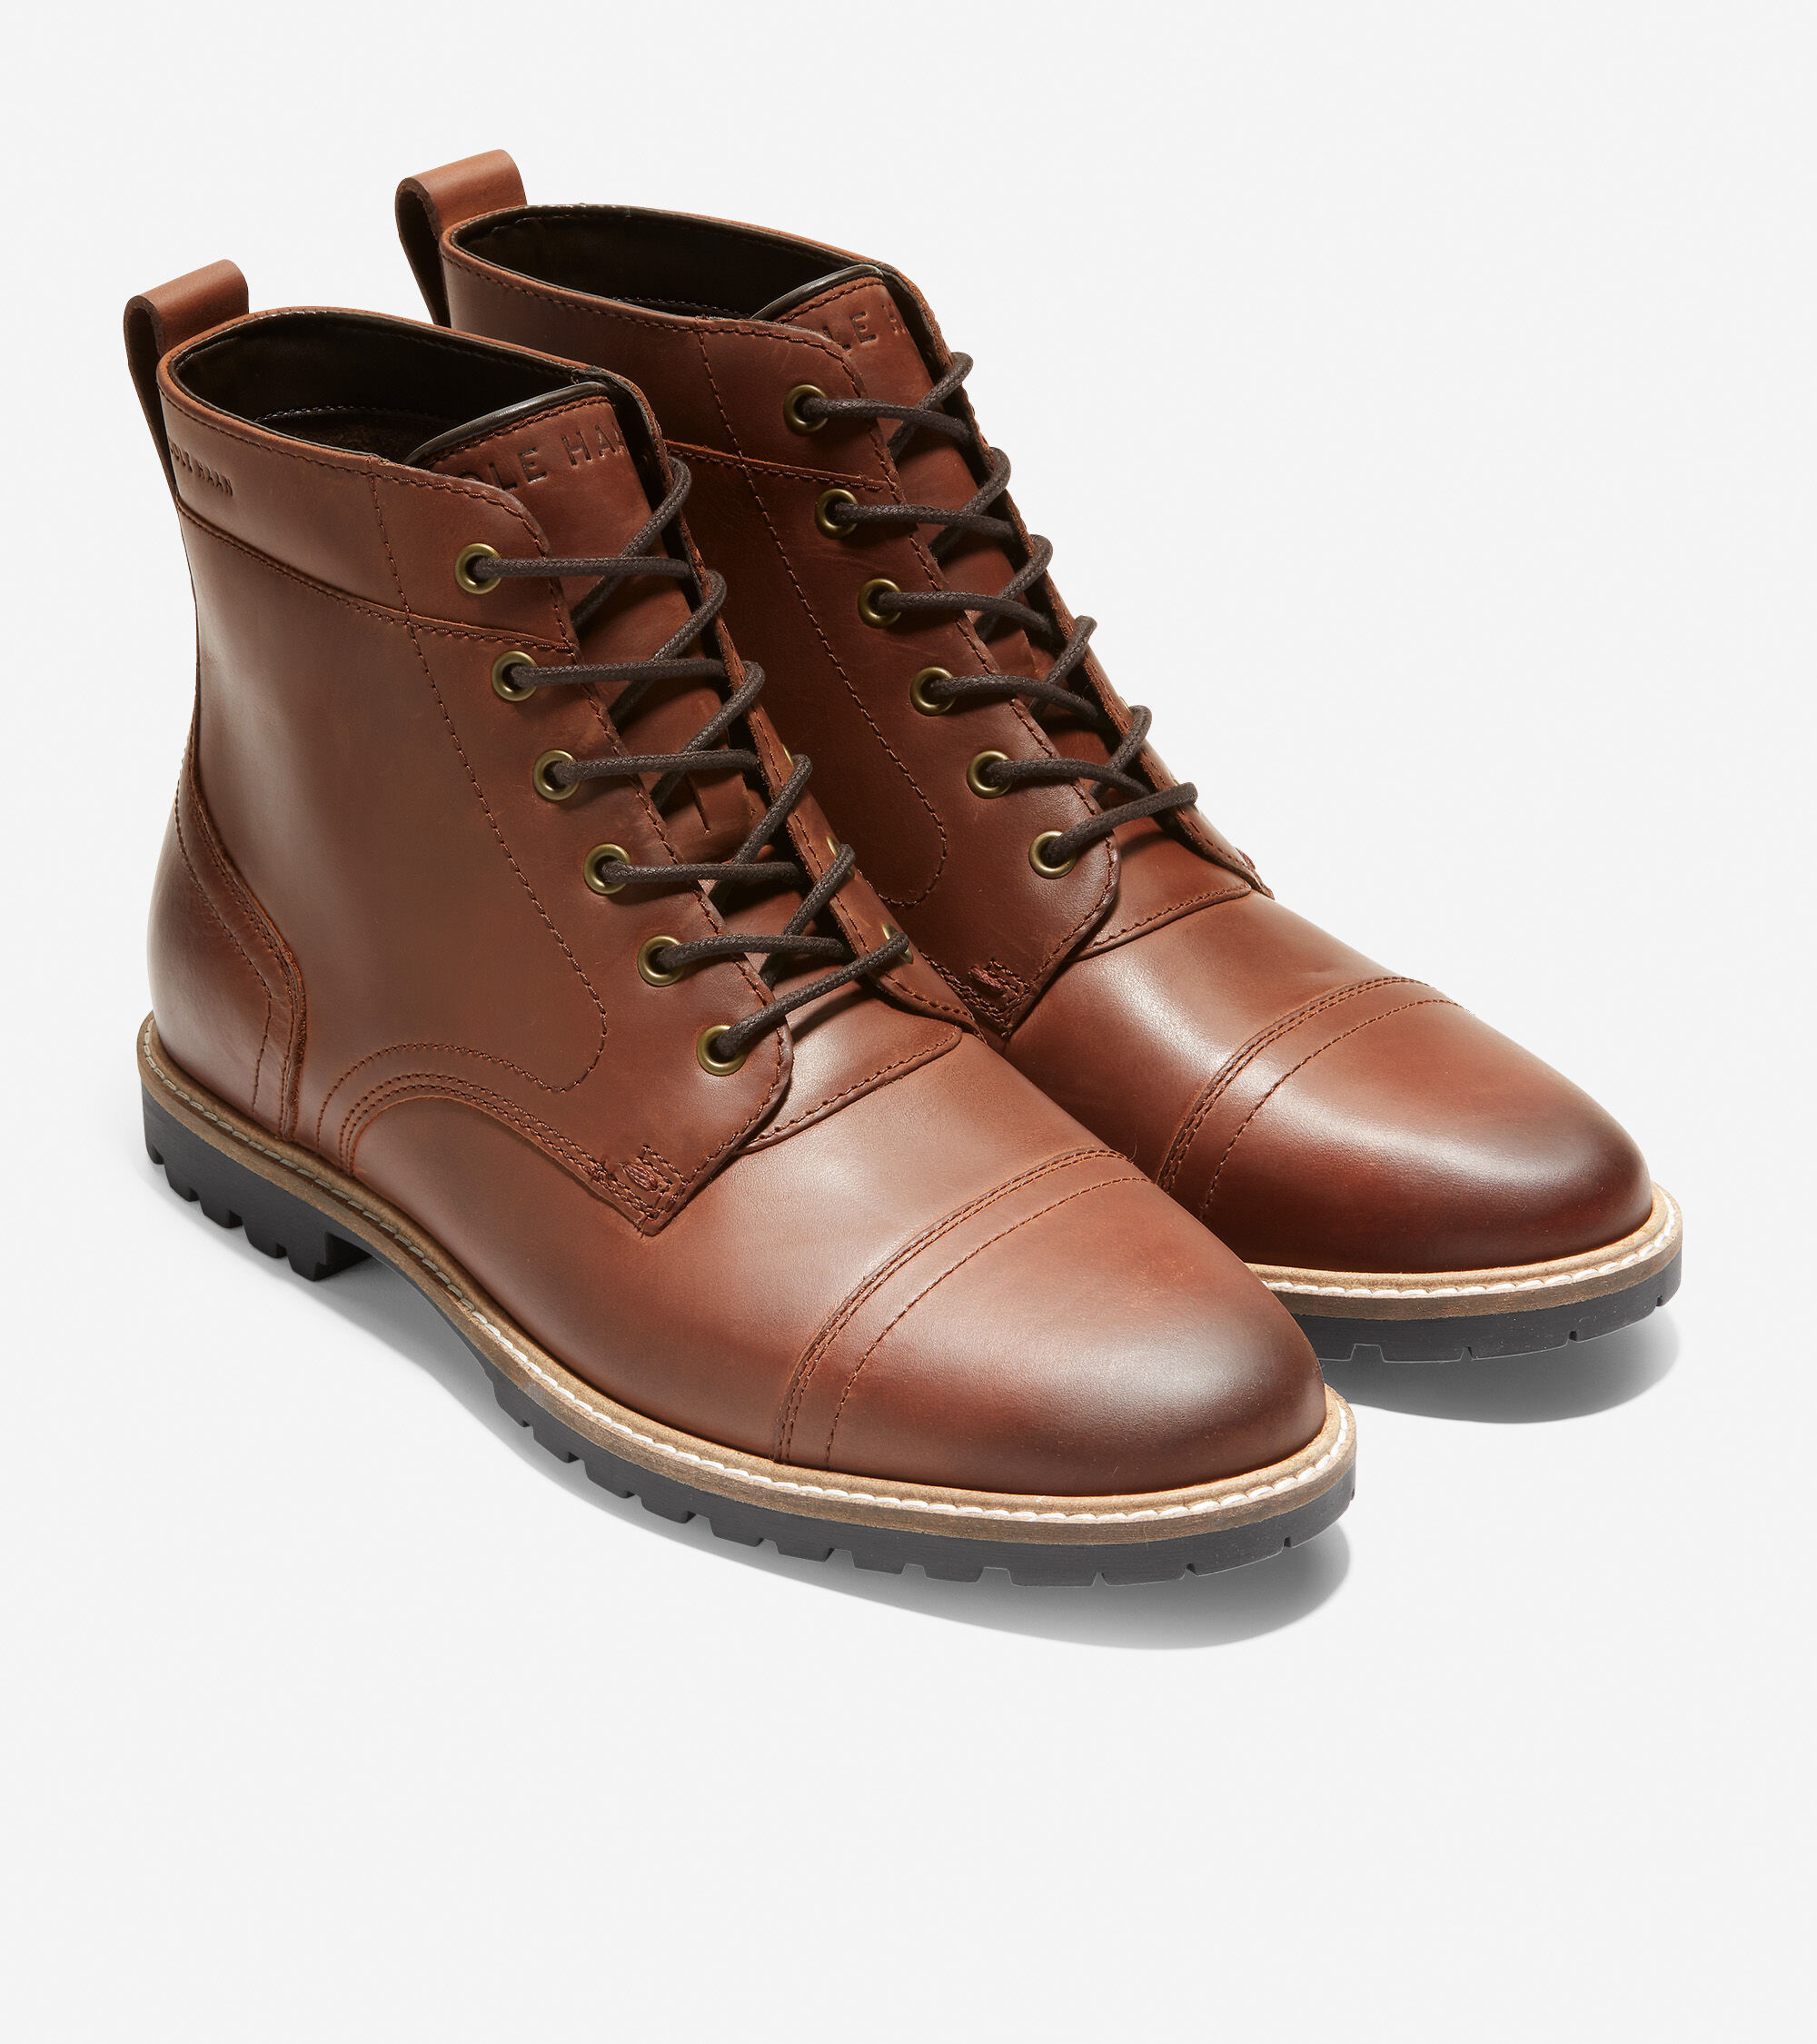 Nathan Cap Toe Boot in Chestnut Leather 